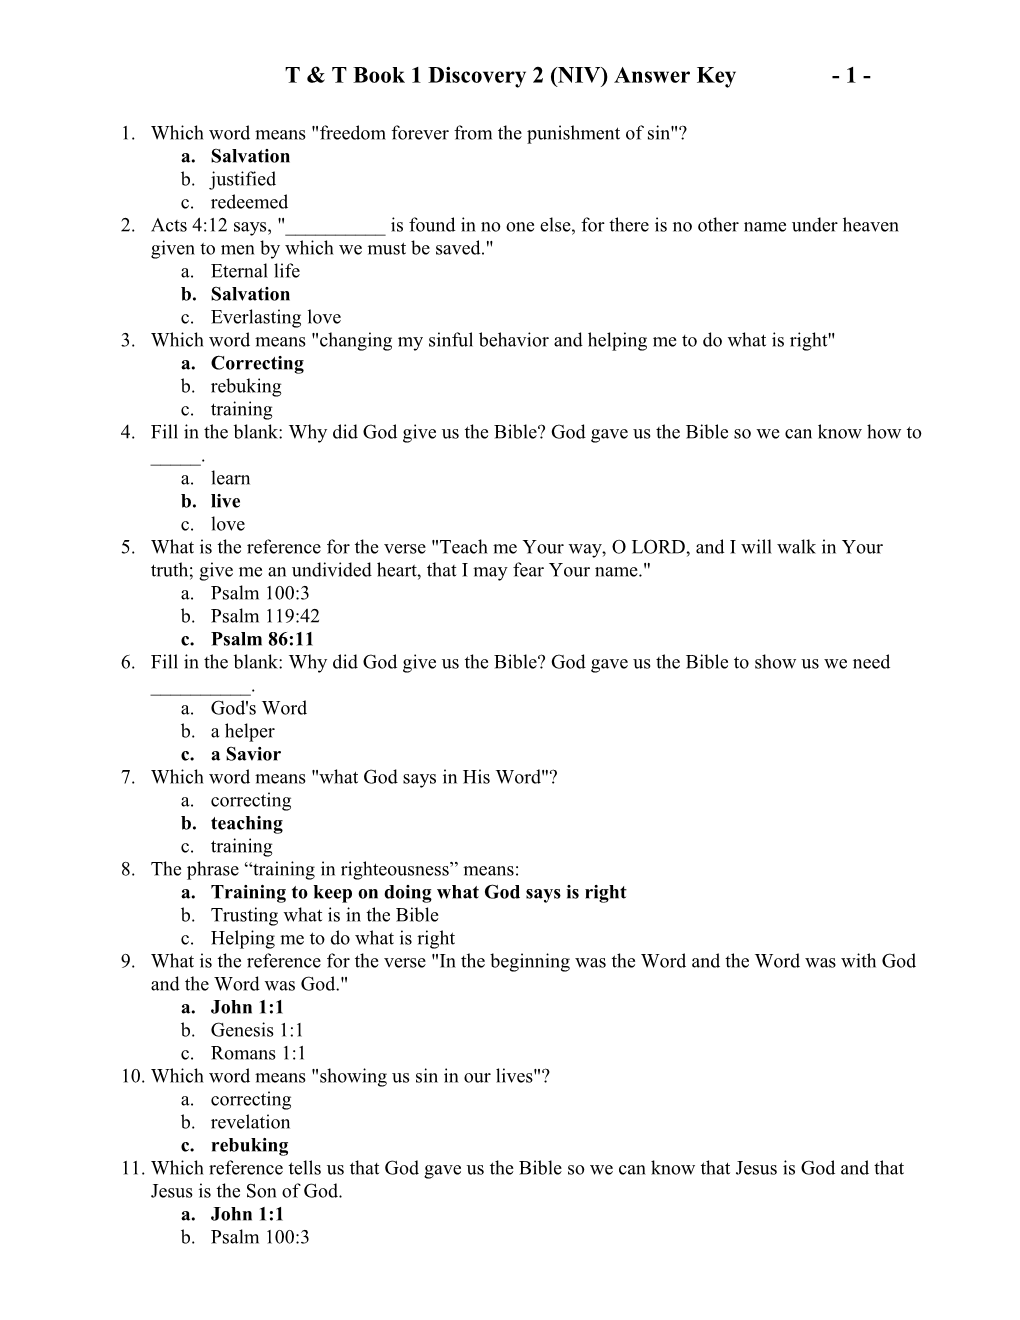 T & T Book 1 Discovery 2 (NIV) Answer Key- 1